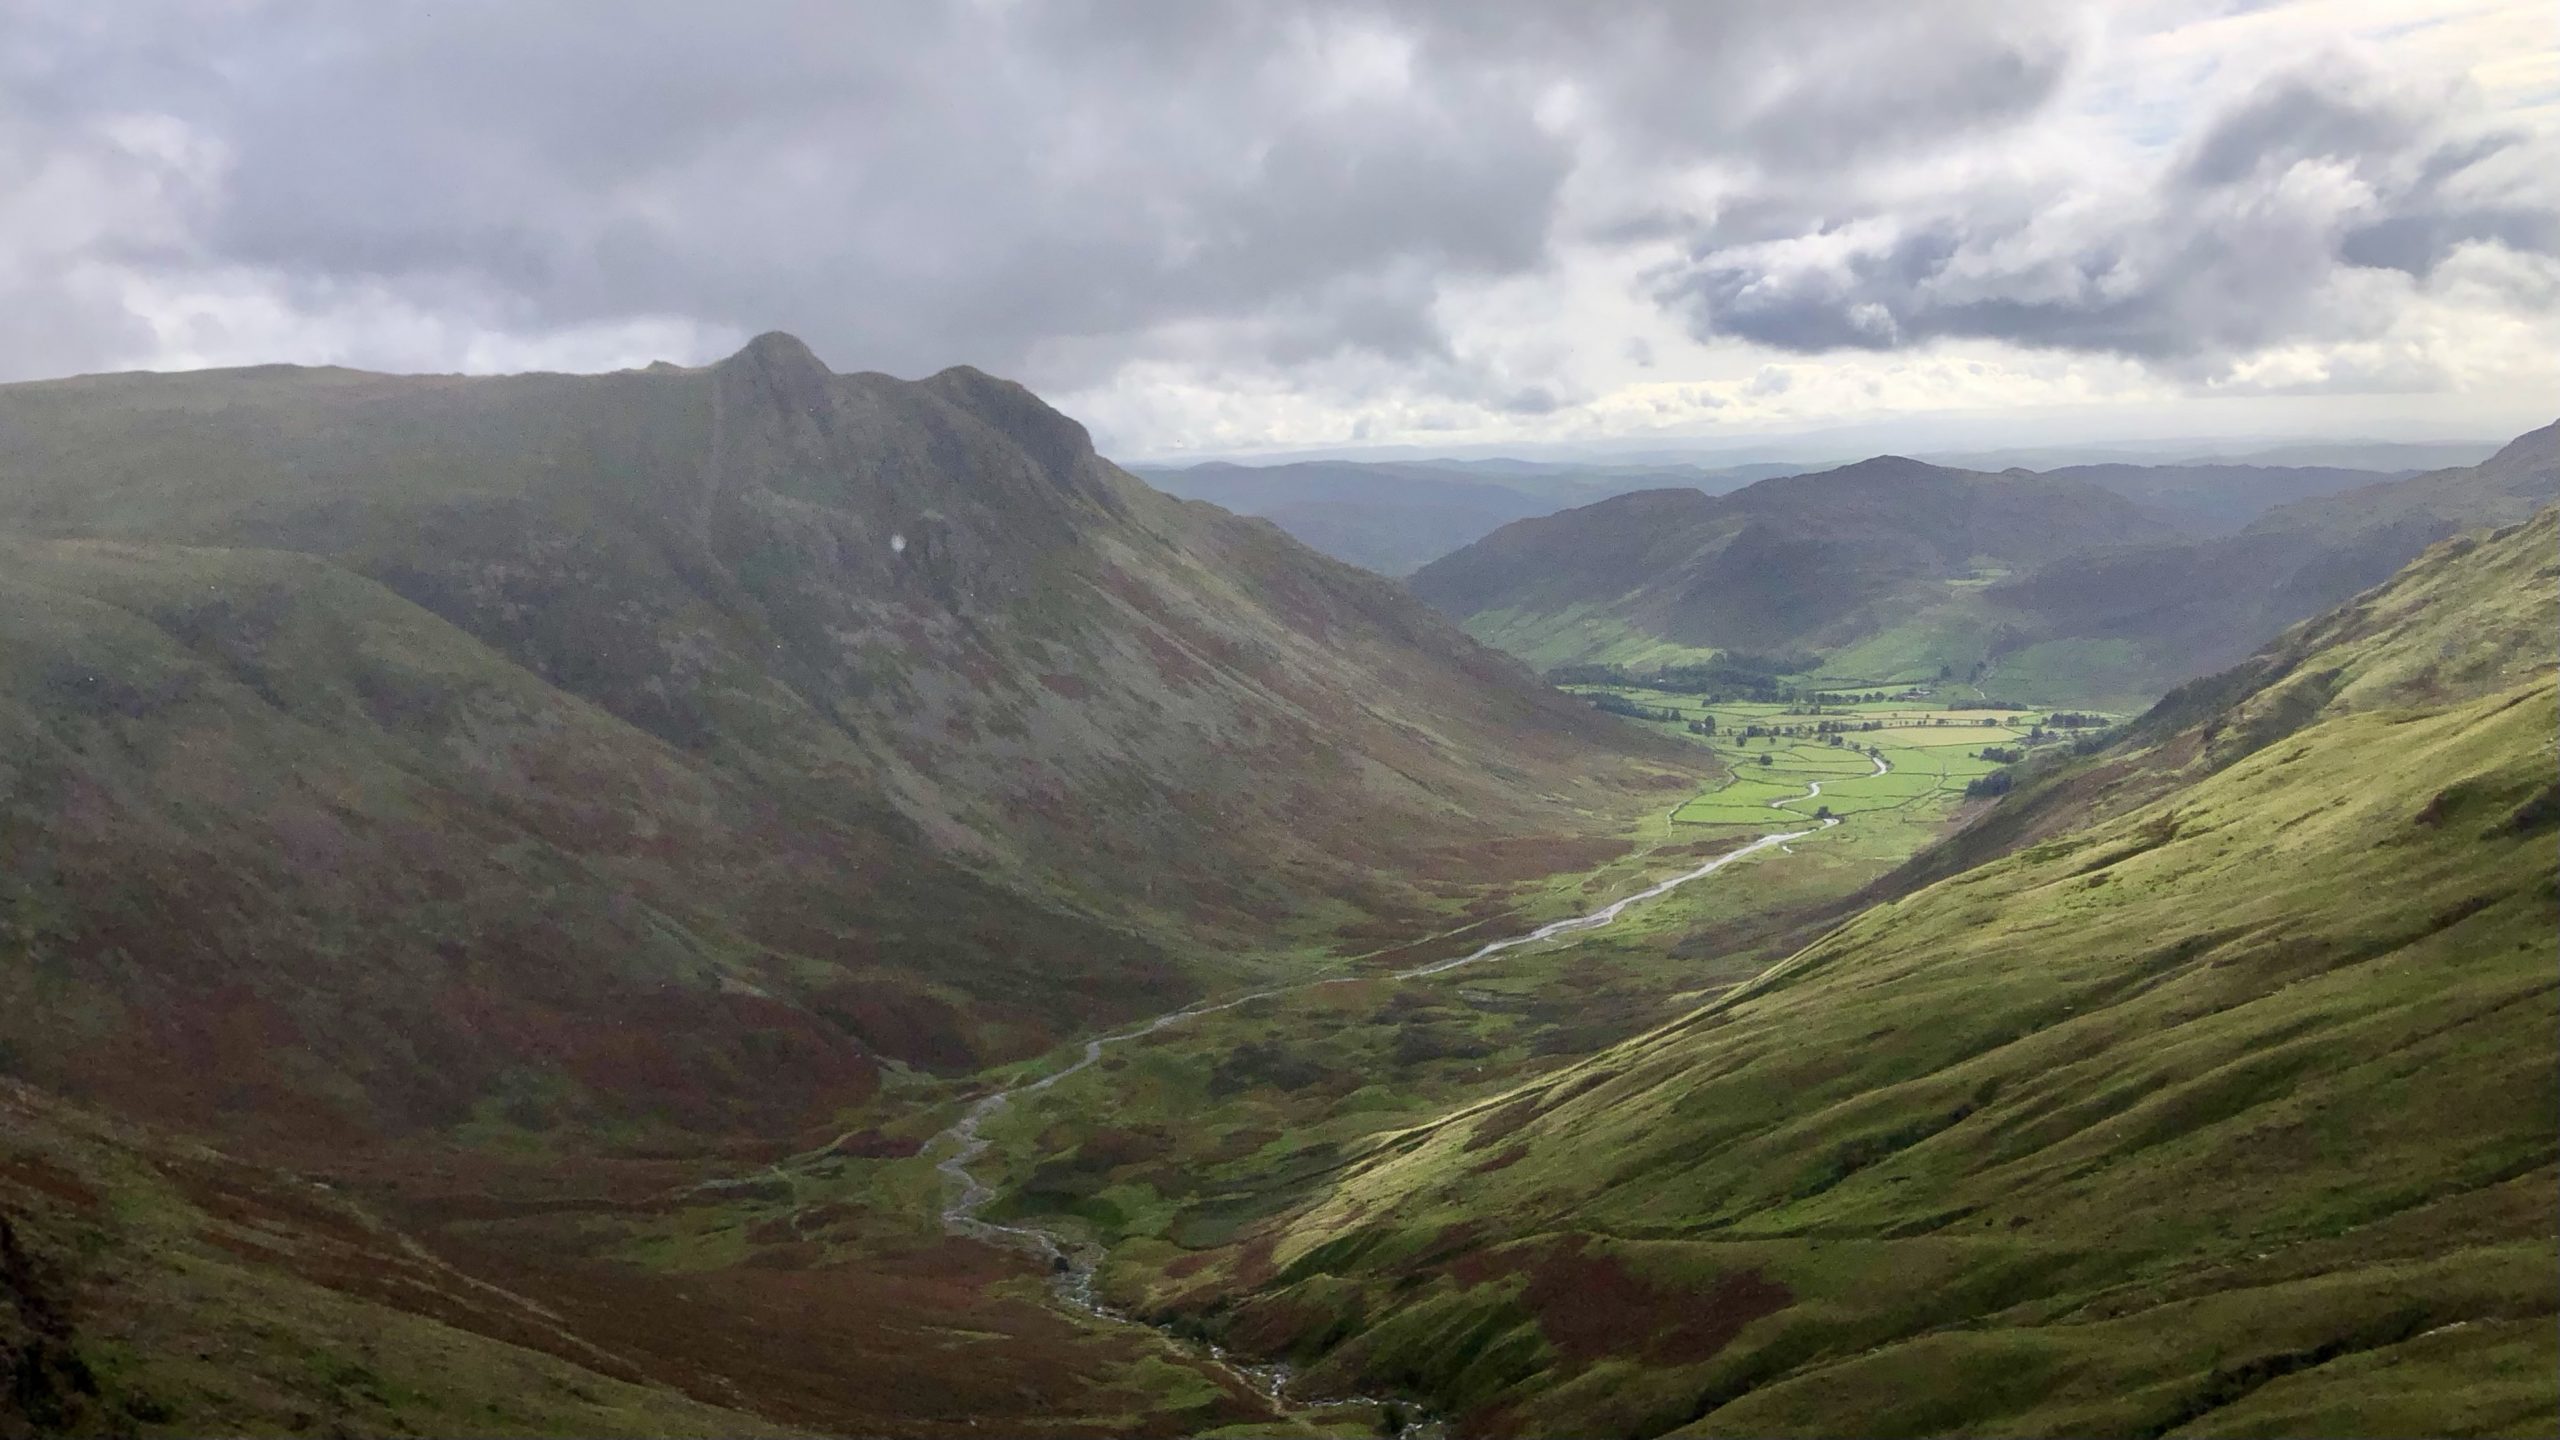 Mickleden, one of the two main tributaries of Great Langdale